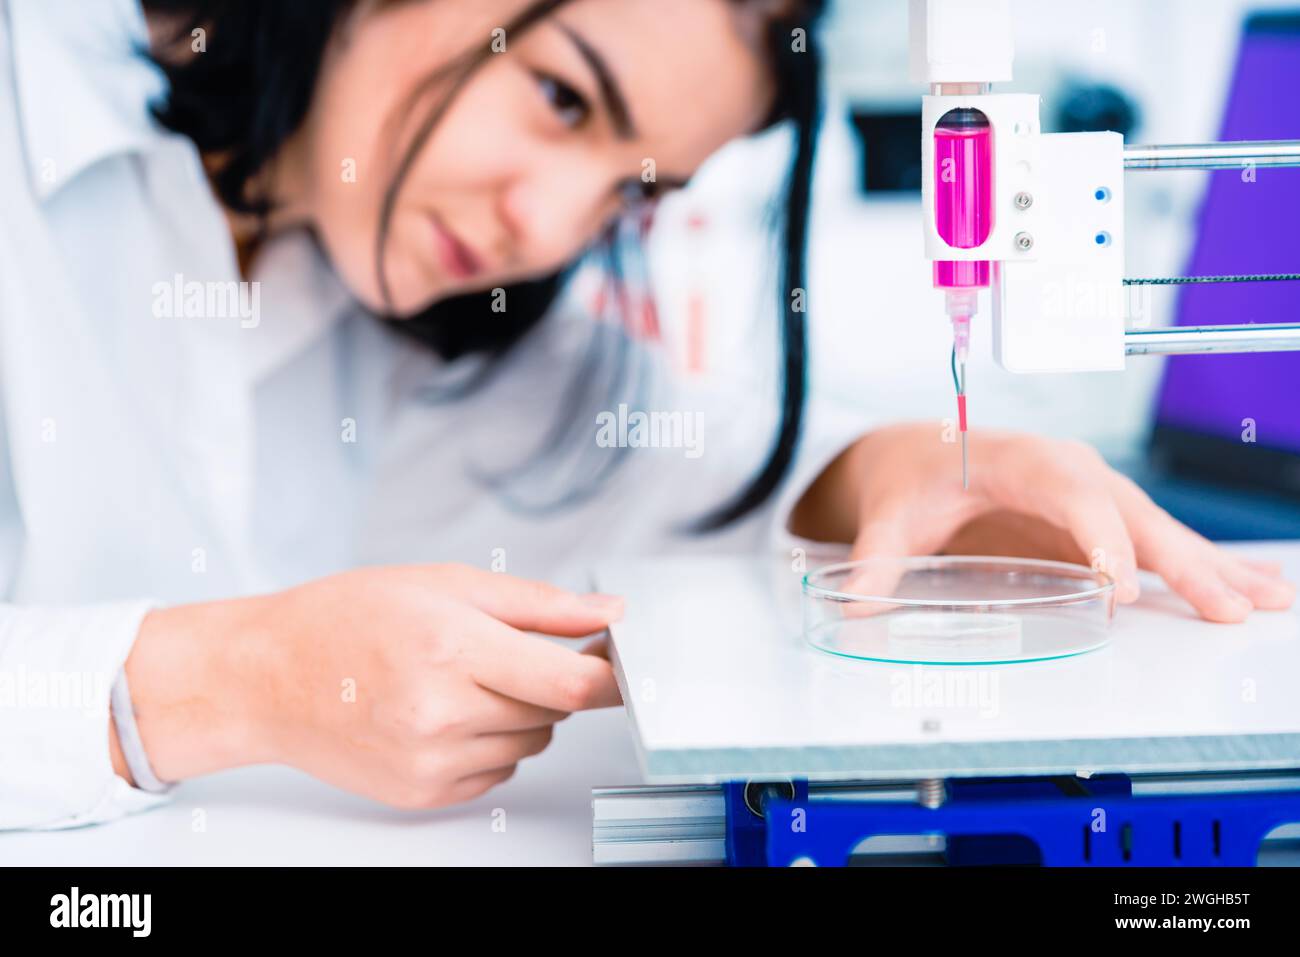 Female Scientist Conducting Medical Research in Laboratory Stock Photo